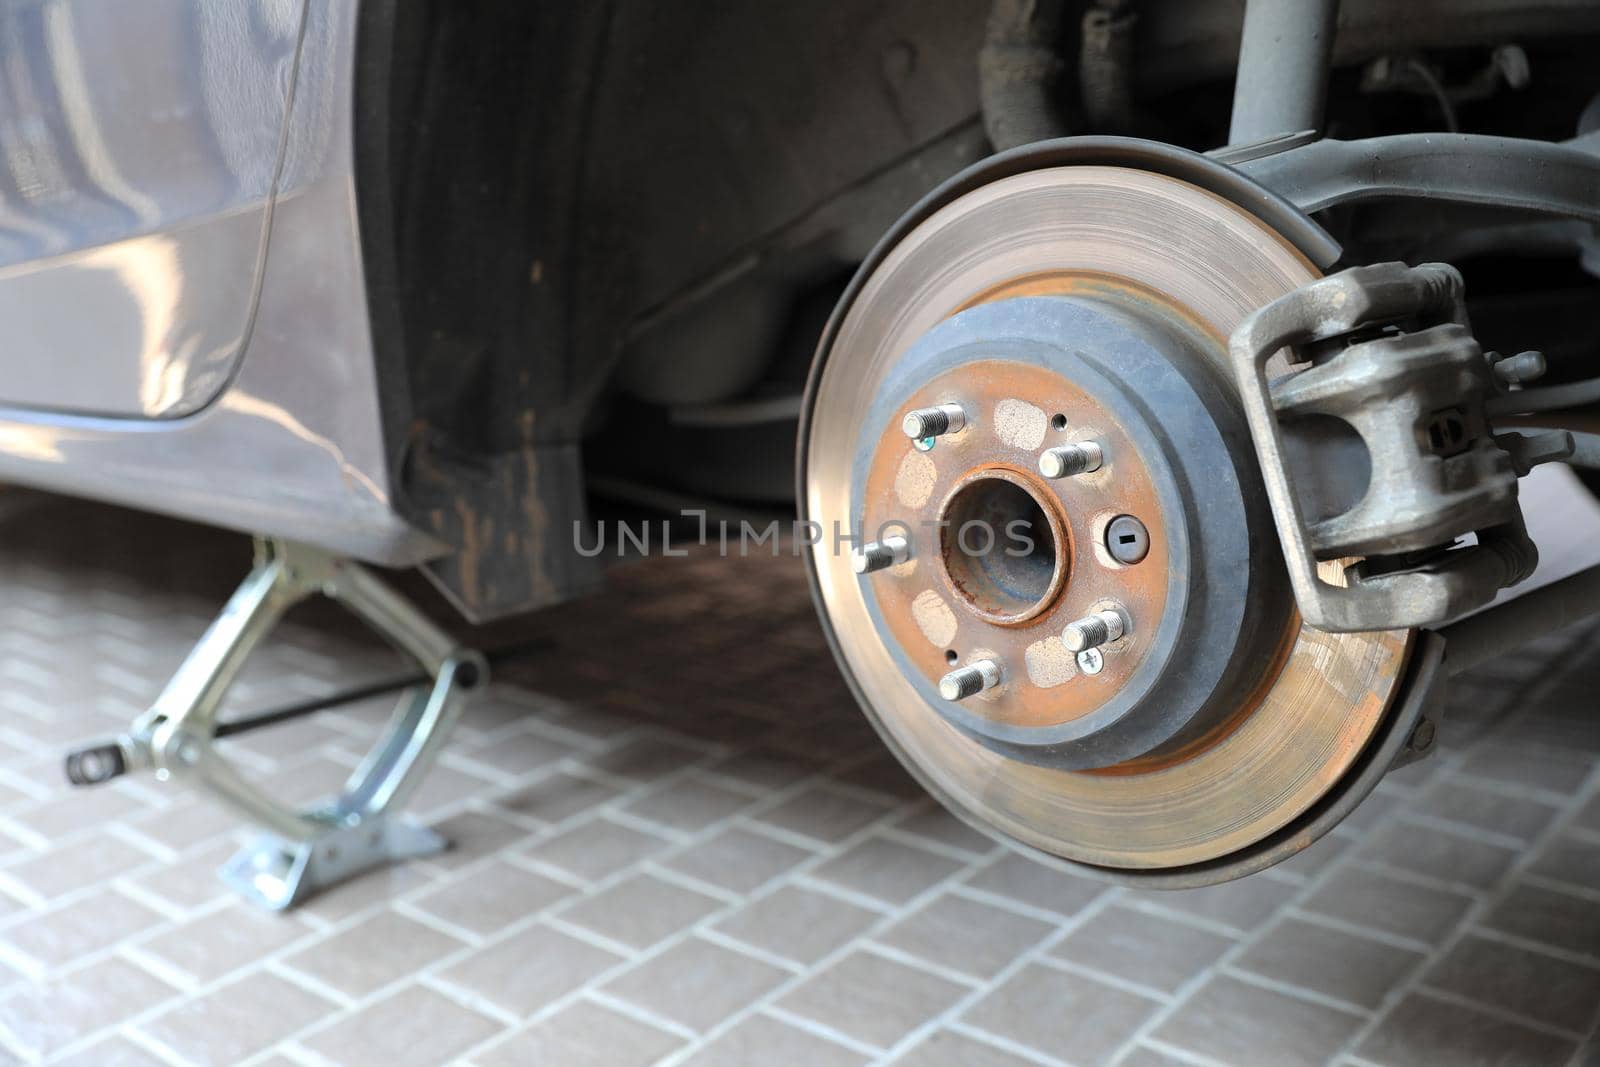 Disk brake and caliper in process of new tire replacement by drpnncpp